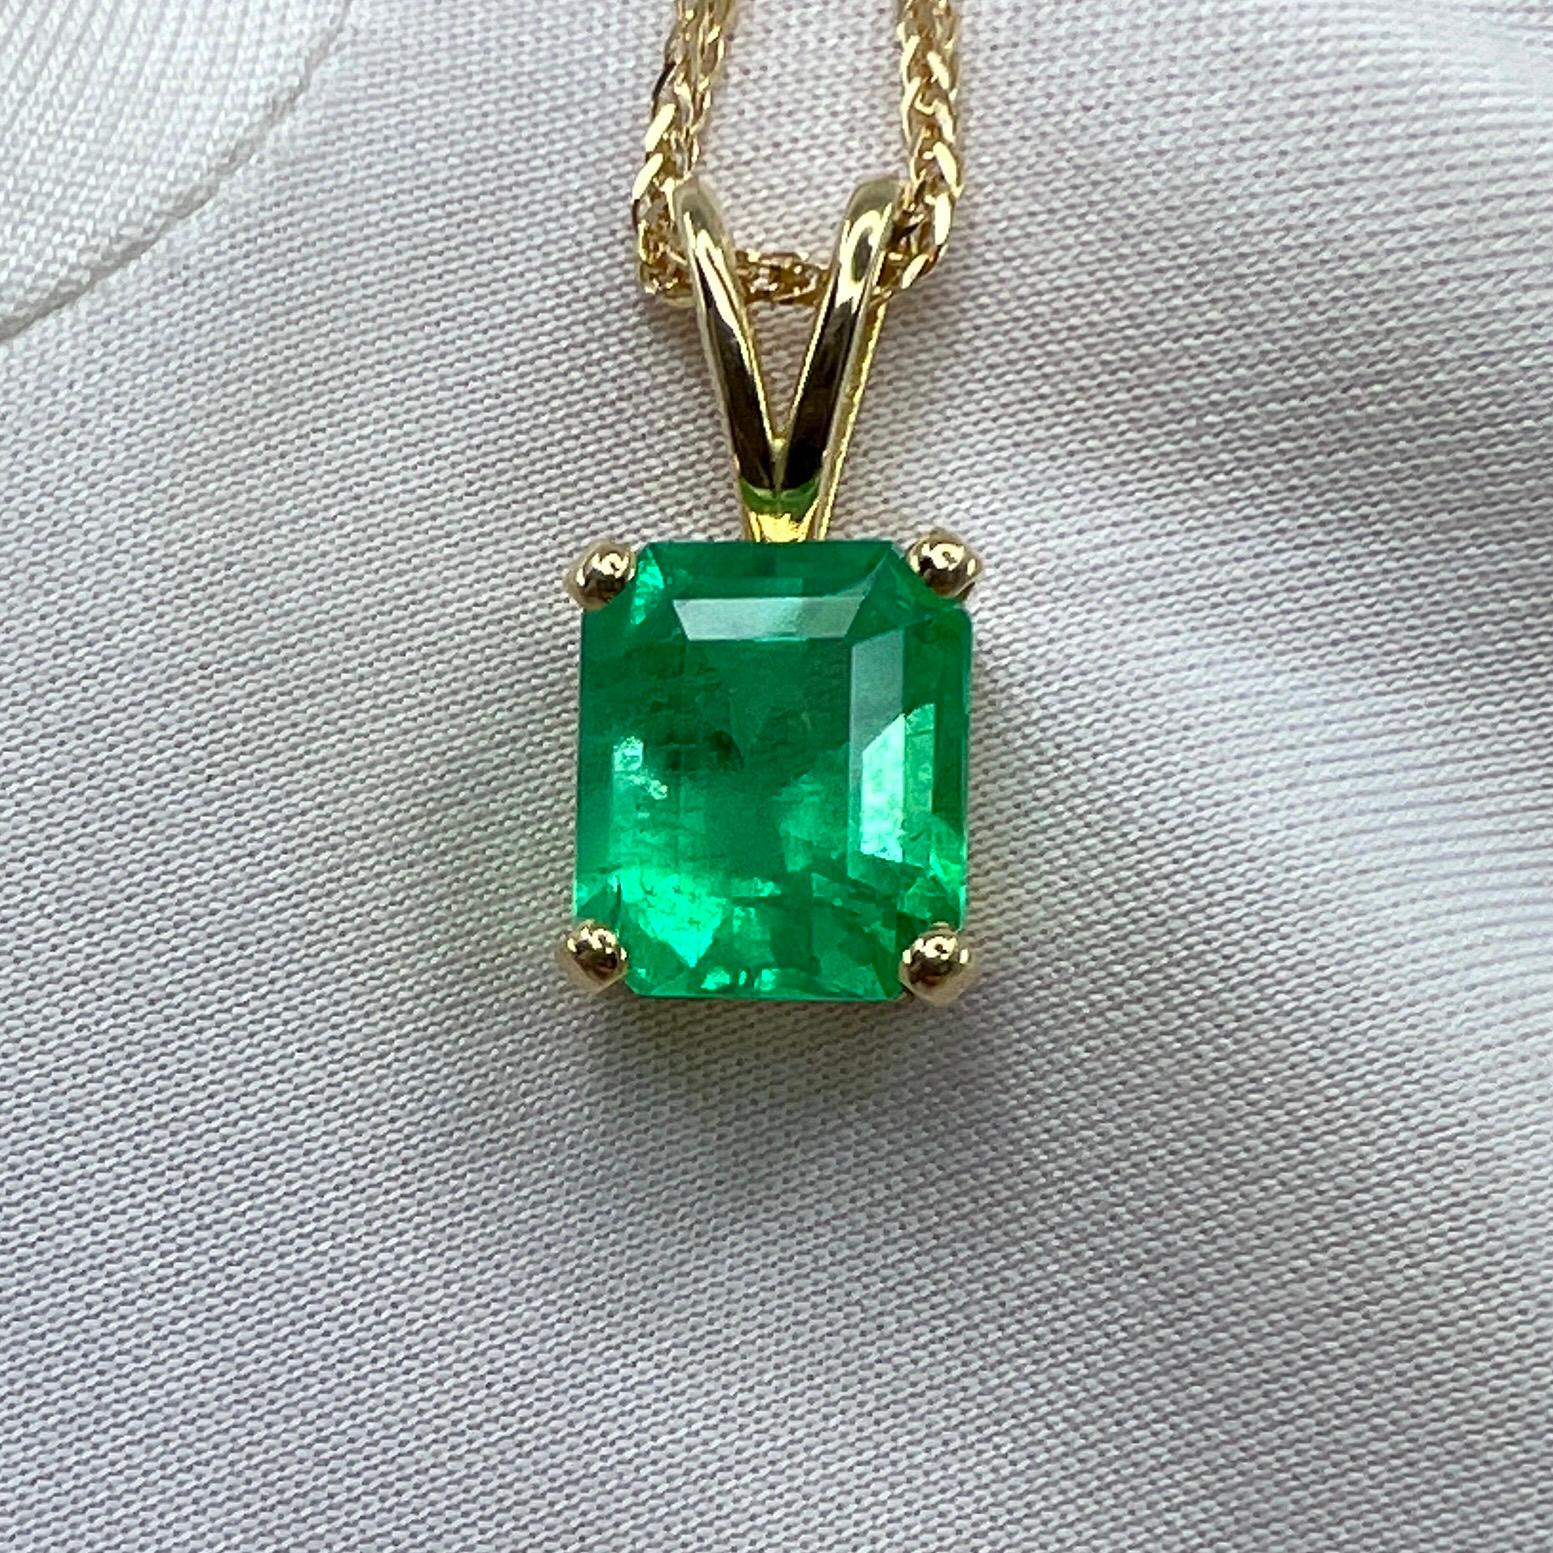 GIA Certified 3.32ct Vivid Green Colombian Emerald 18k Gold Pendant Necklace 3